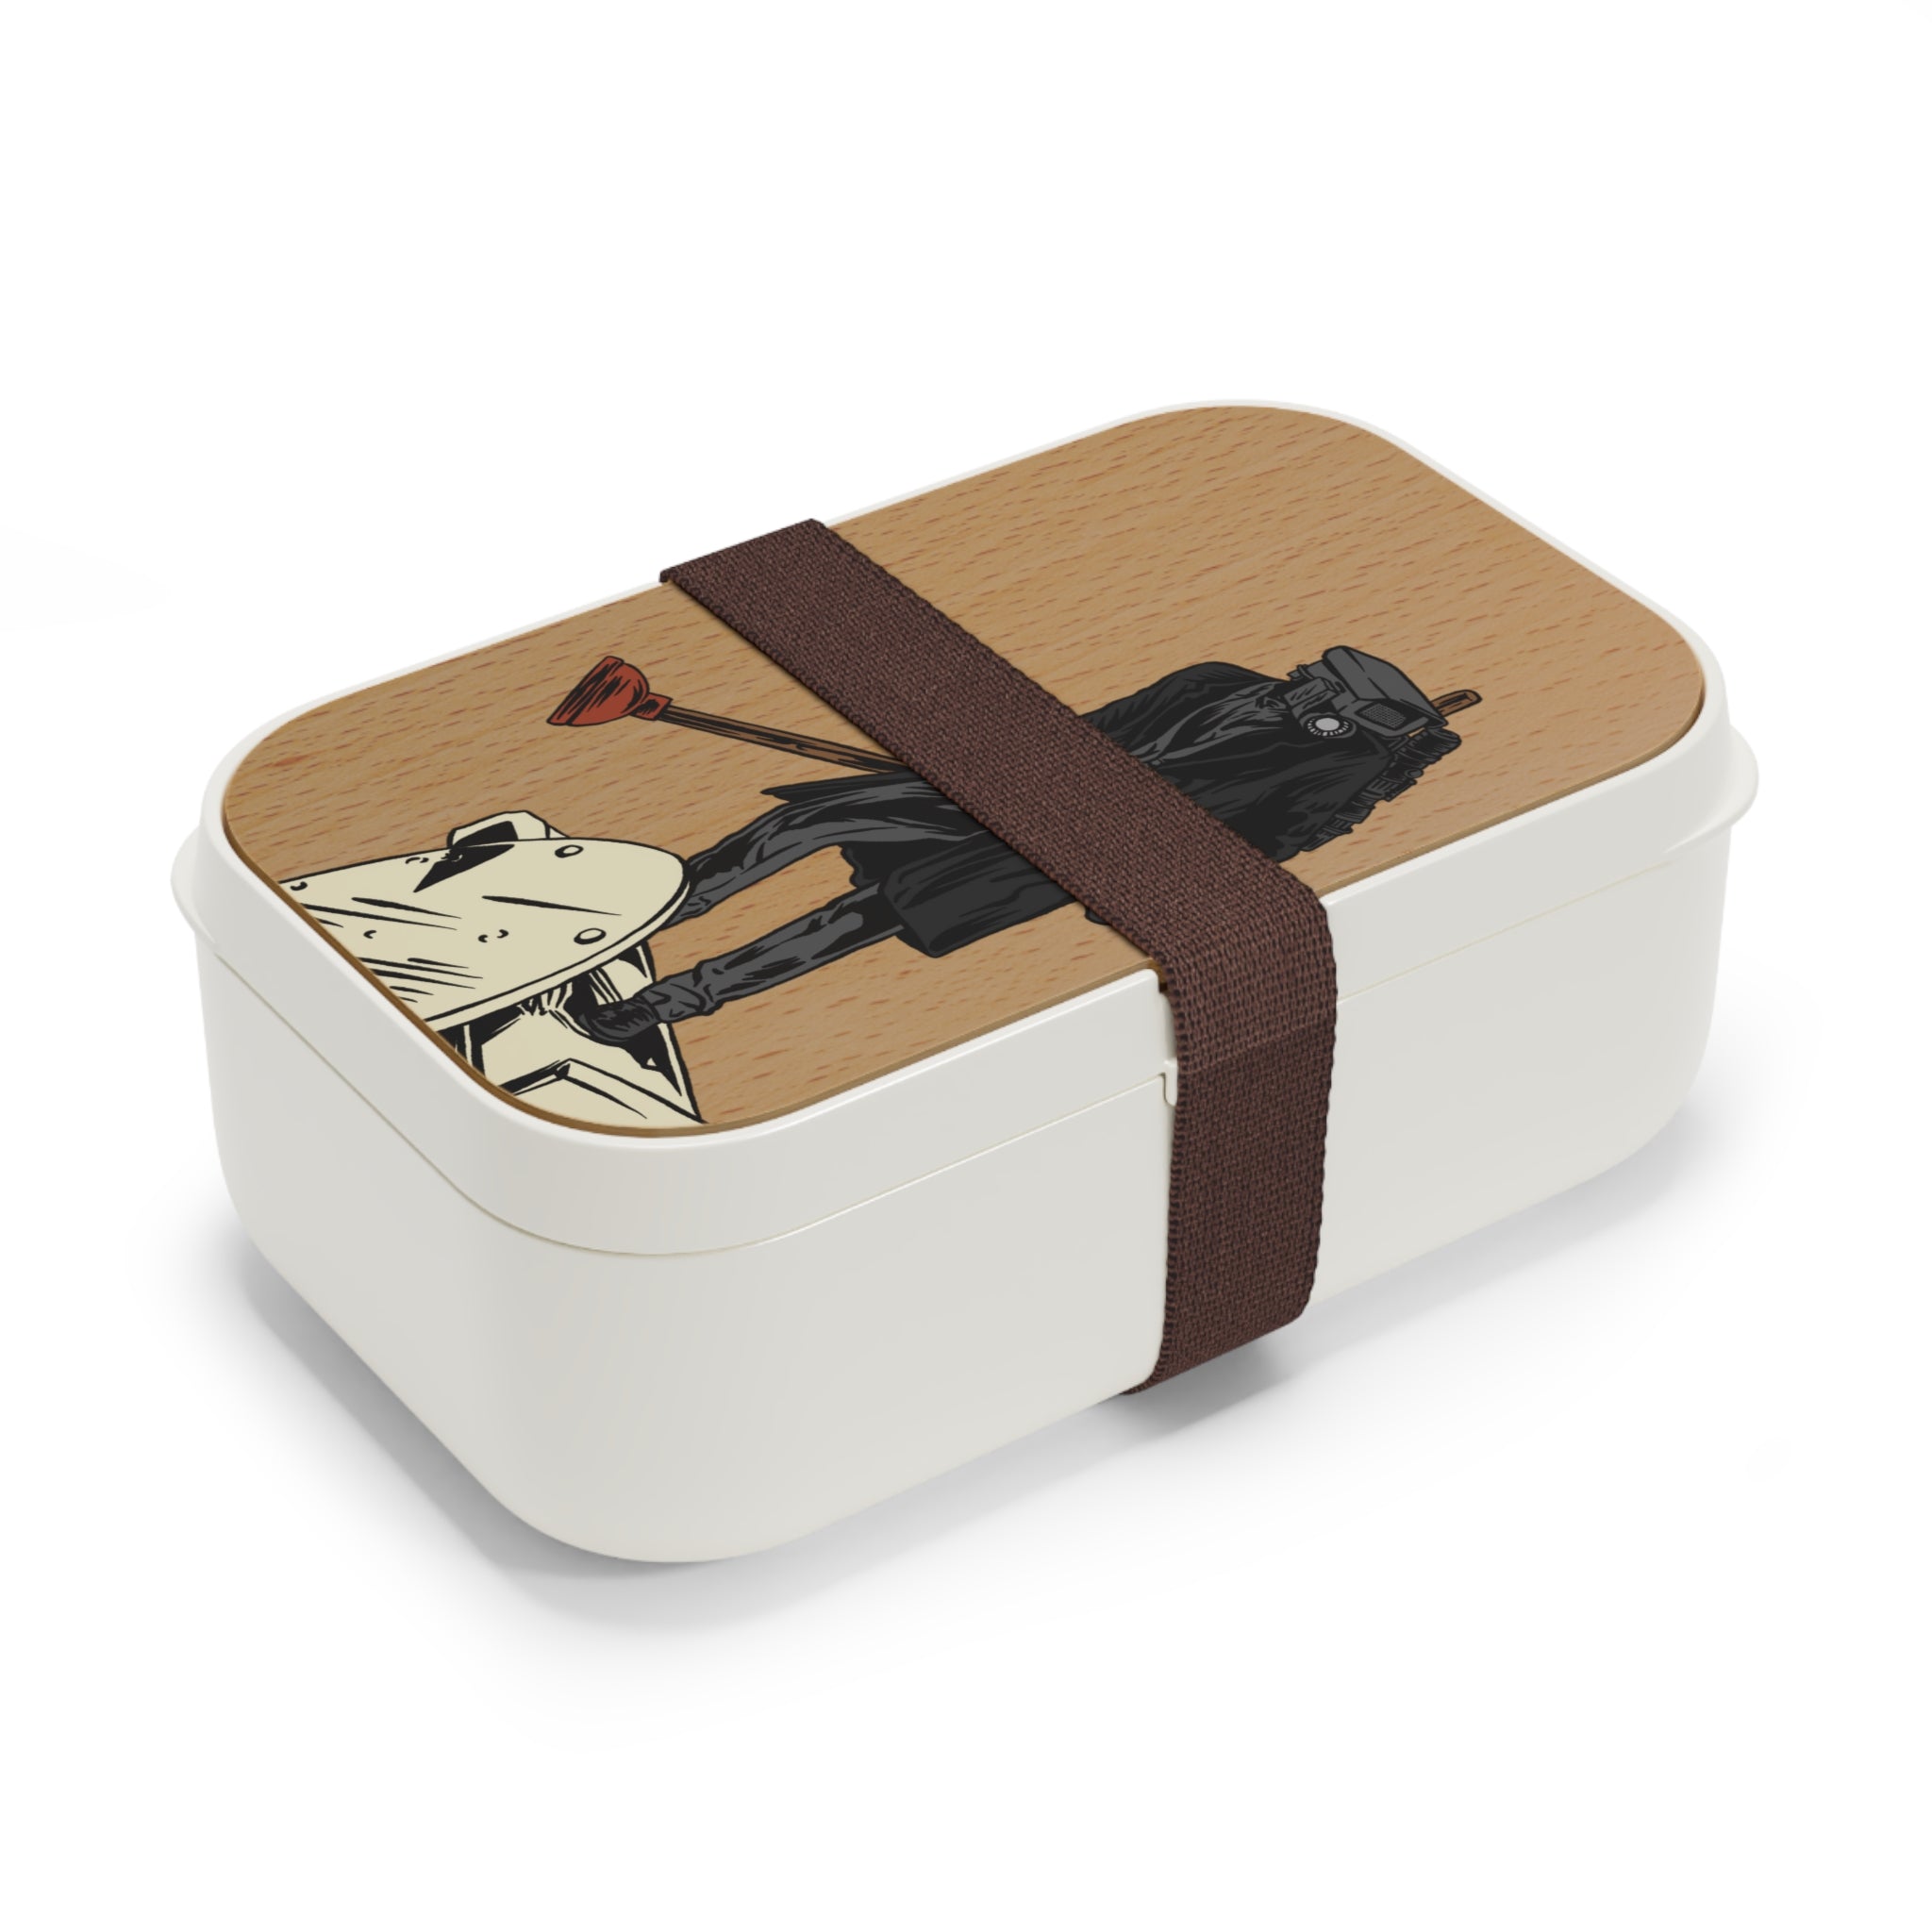 Plungerman atop toilet on bento box, wooden lid with brown elastic strap